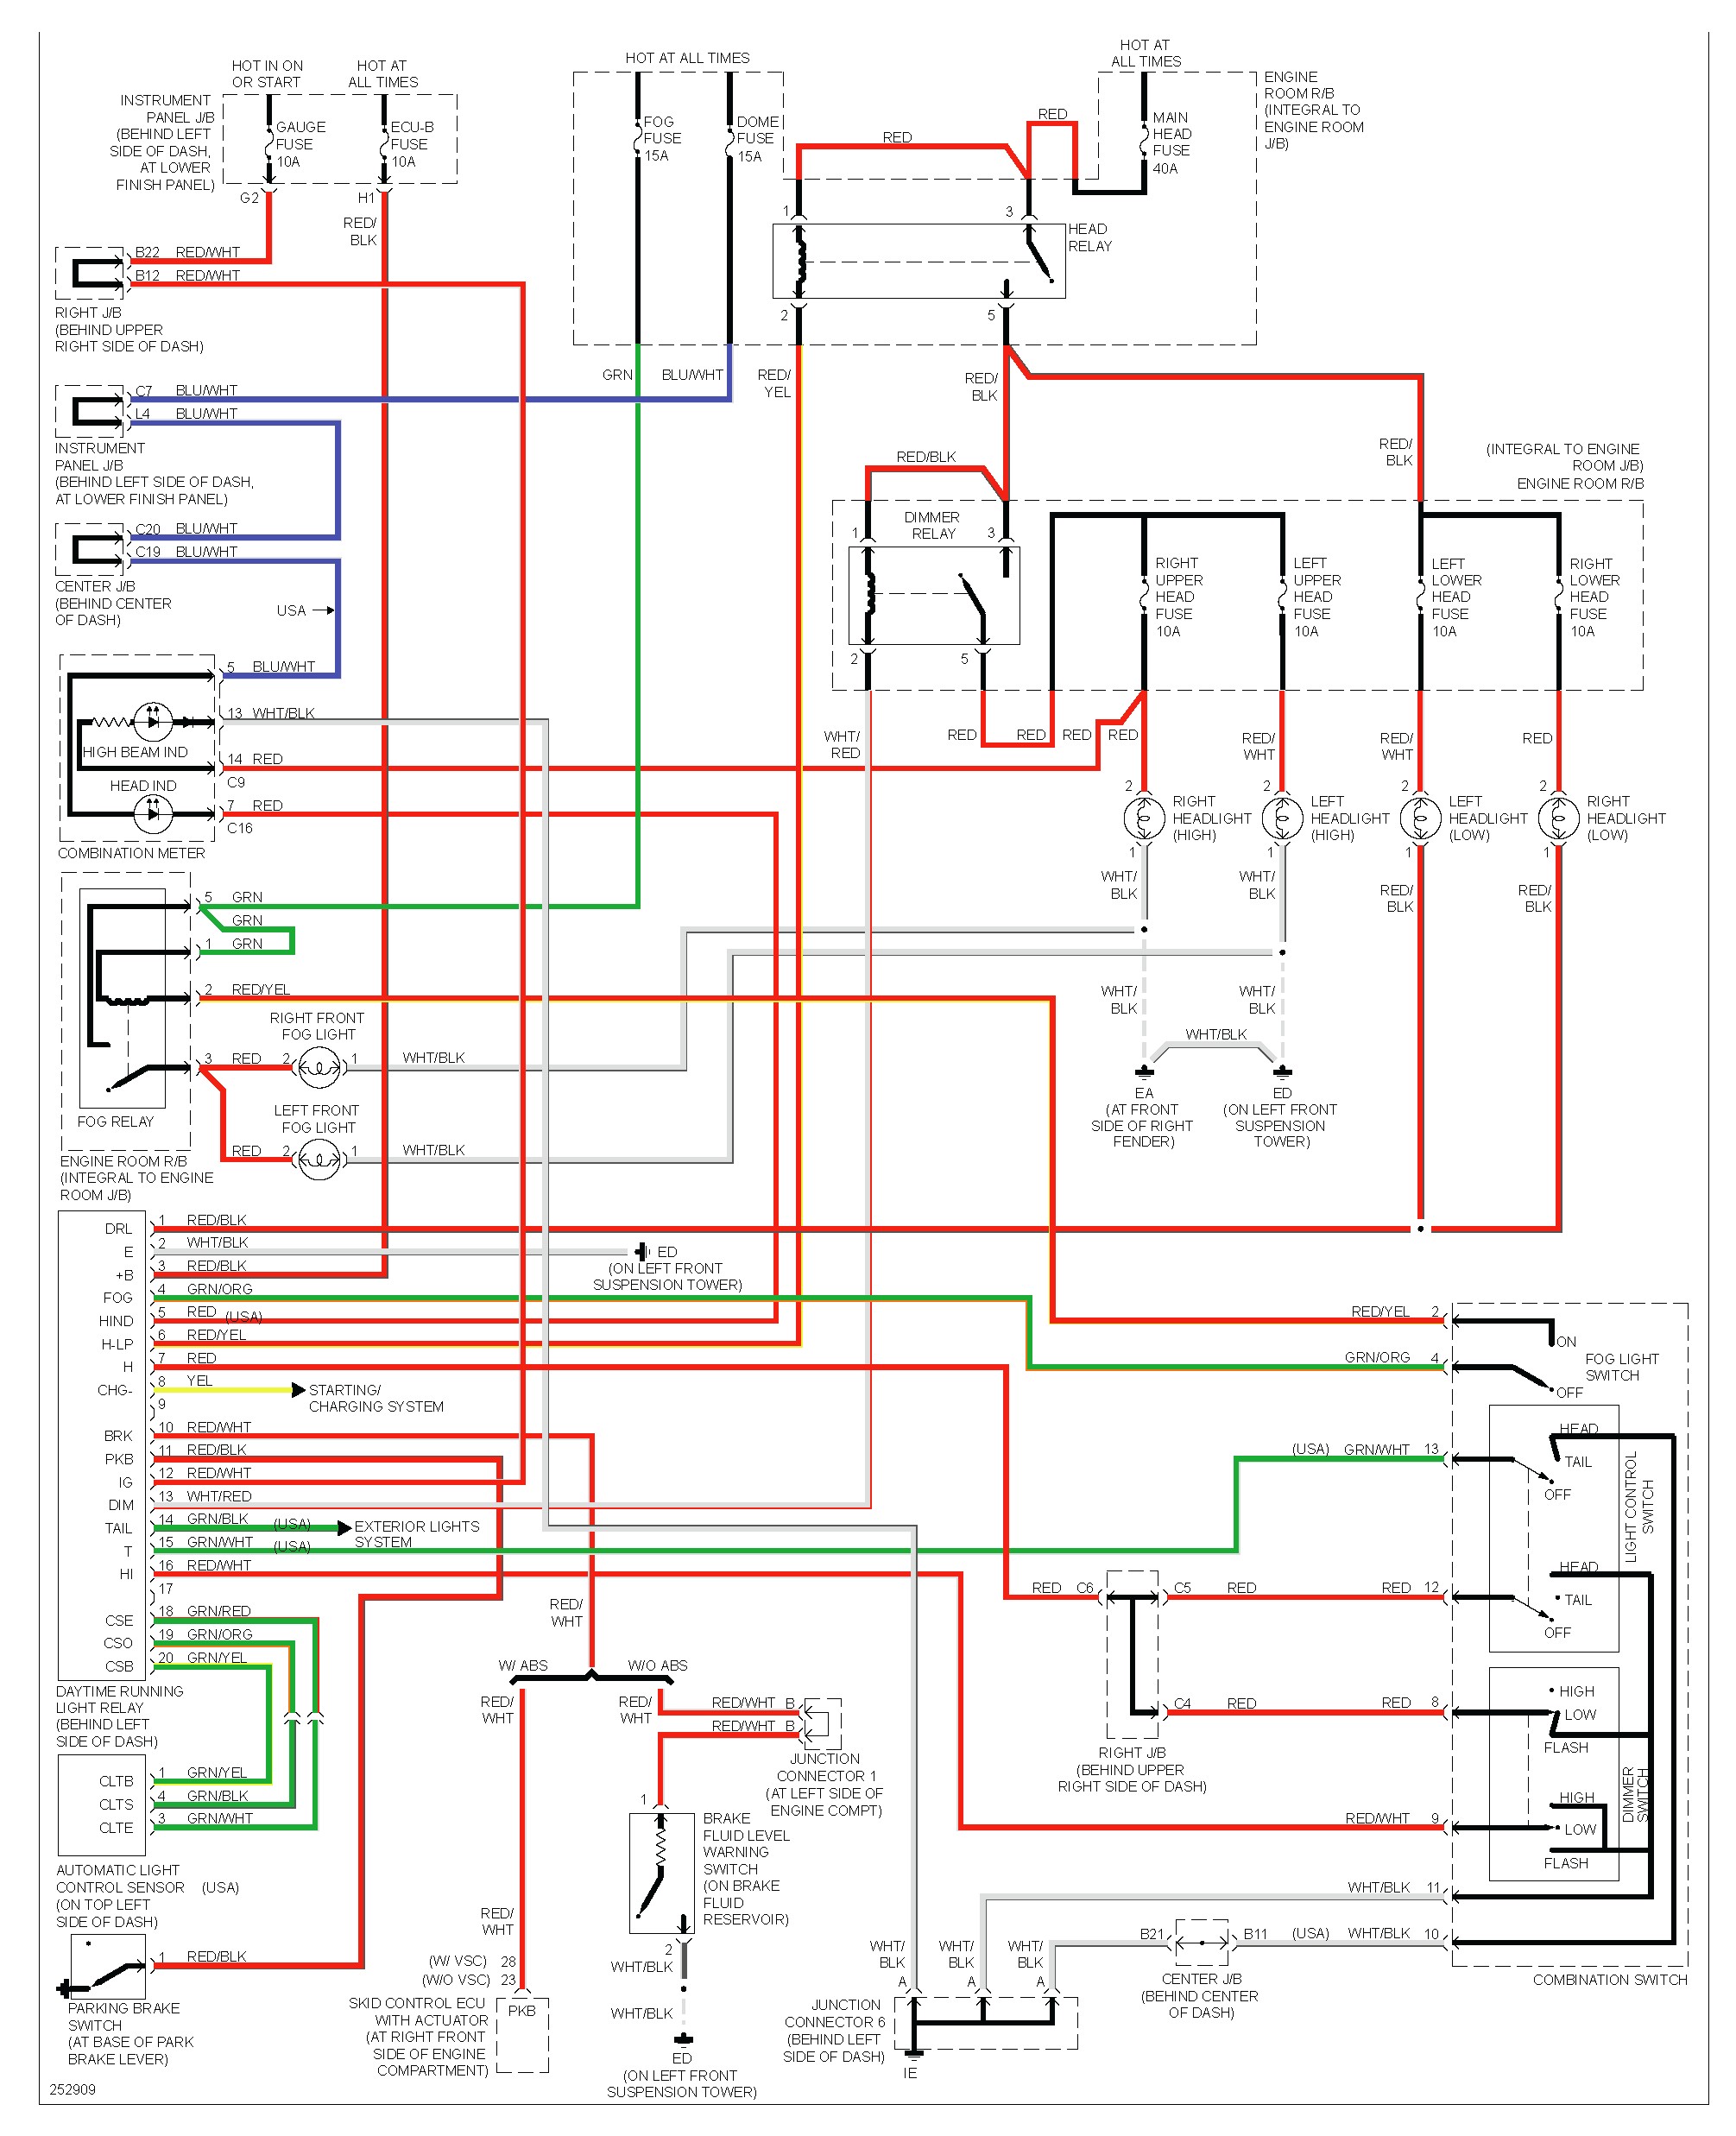 Car Wiring Diagrams Explained Automotive Wire Diagram Wiring Diagram Of Car Wiring Diagrams Explained